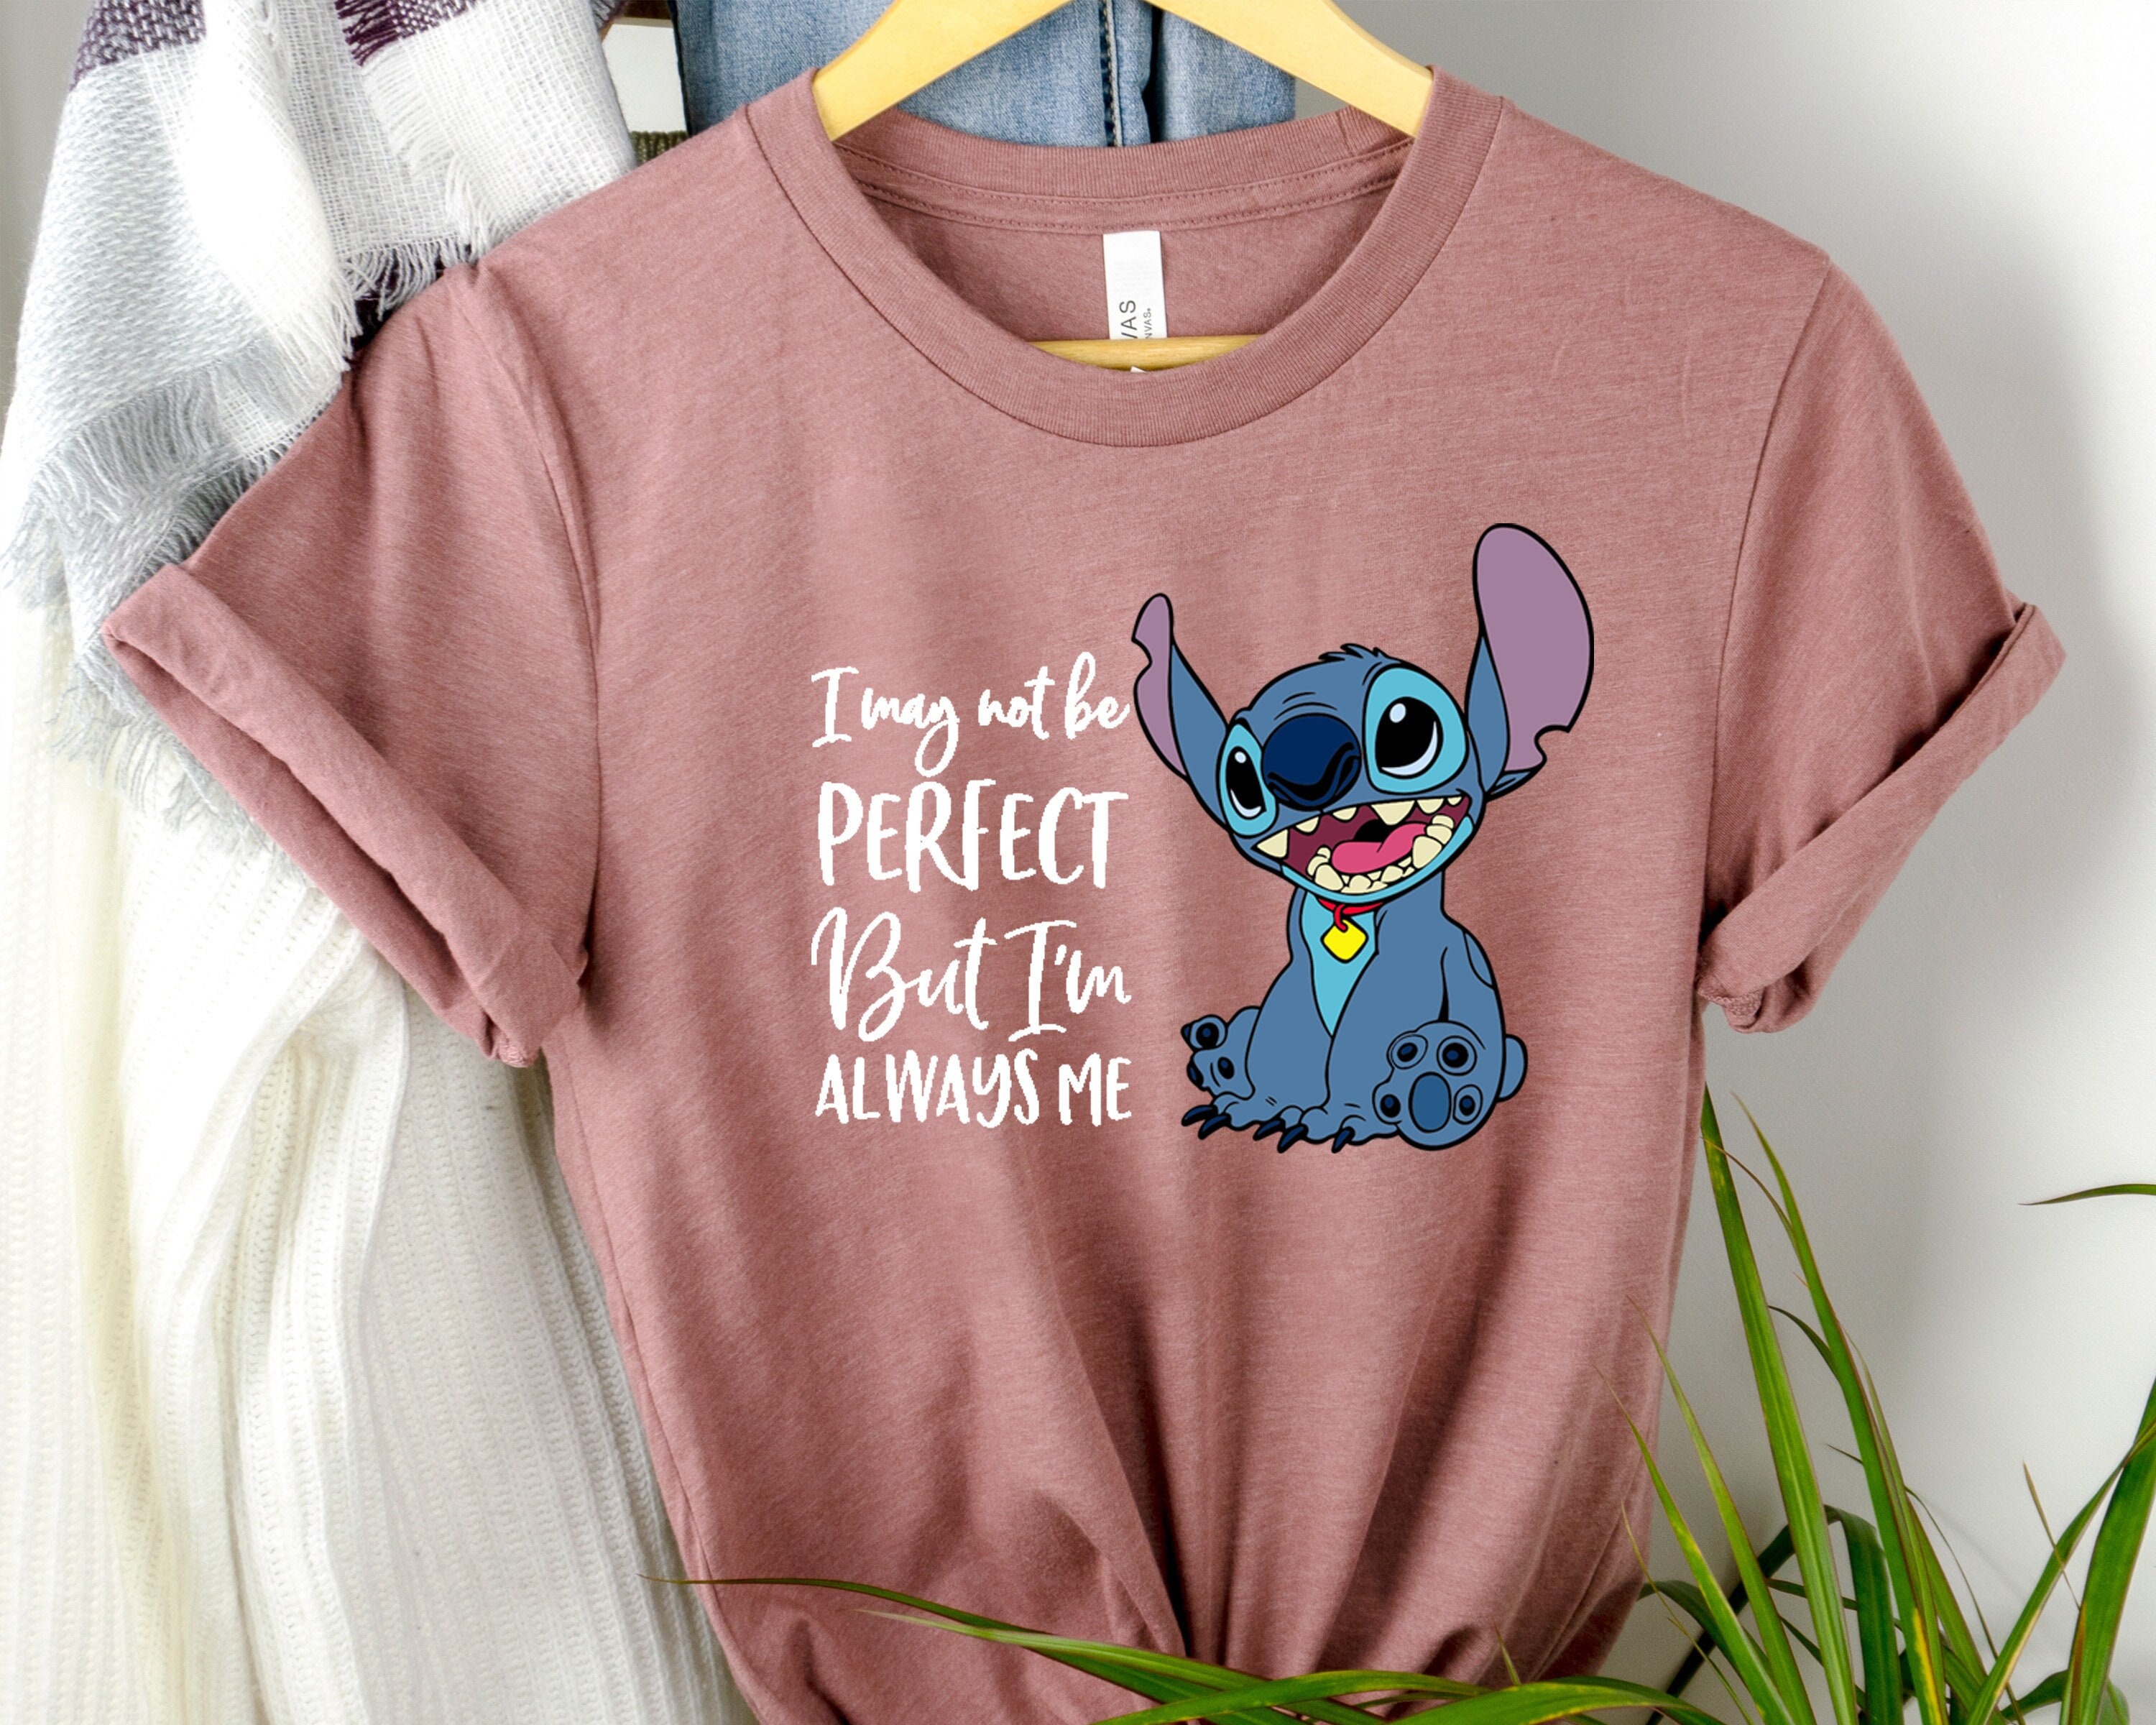 Lilo & Stitch - Will Trade Sister For Candy - Toddler And Youth Short  Sleeve Graphic T-Shirt 